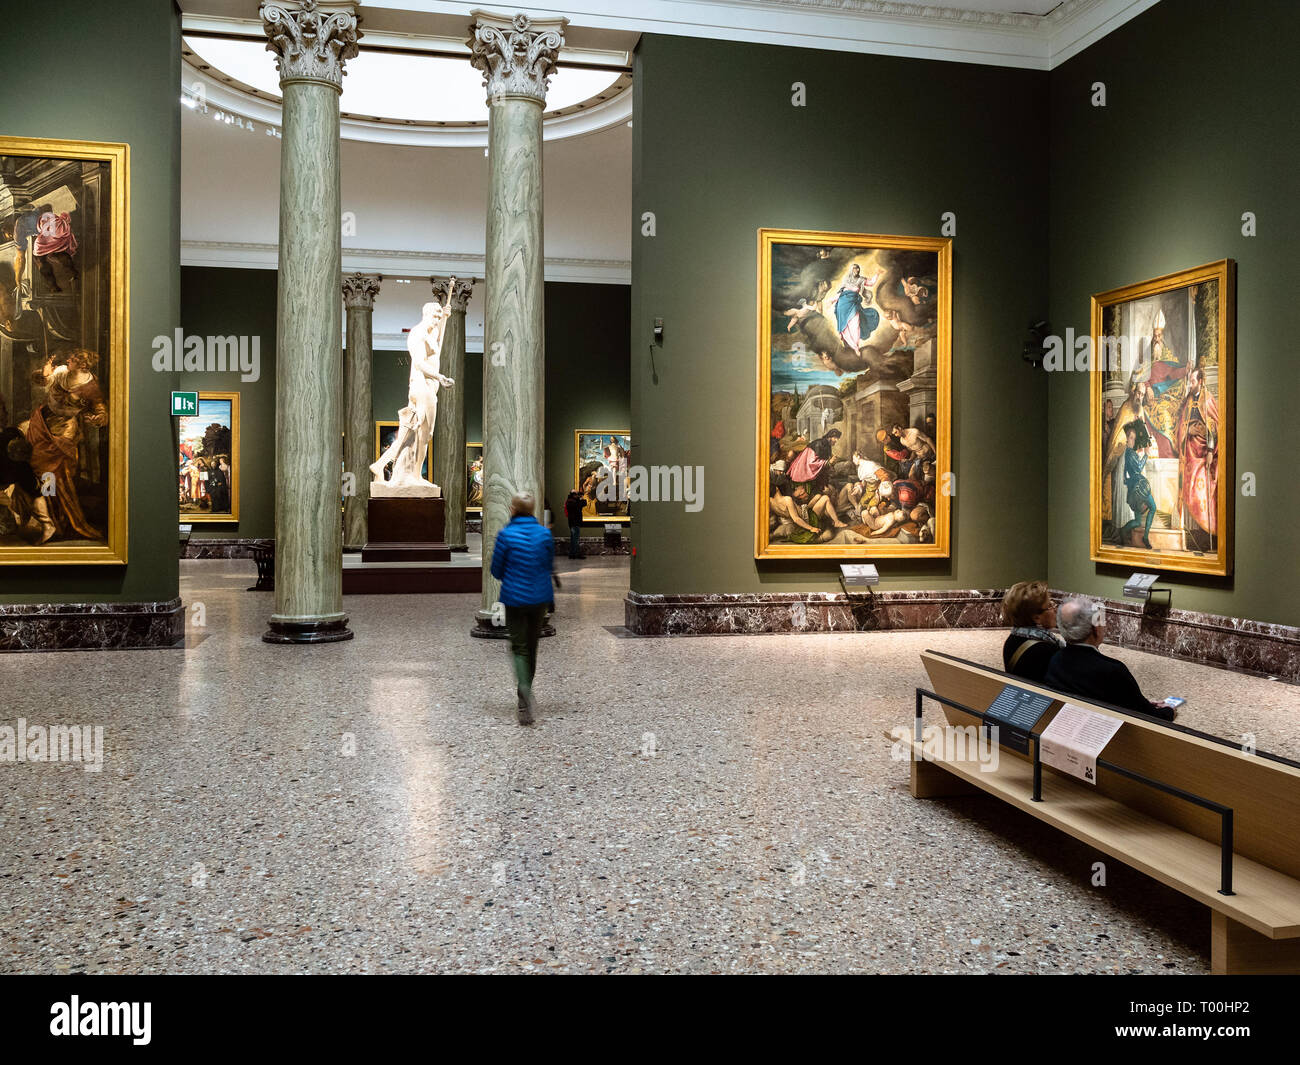 MILAN, ITALY - FEBRUARY 24, 2019: tourists inside of Pinacoteca di Brera ( Brera Art Gallery) in Milan. The Brera is national picture gallery of  ancien Stock Photo - Alamy